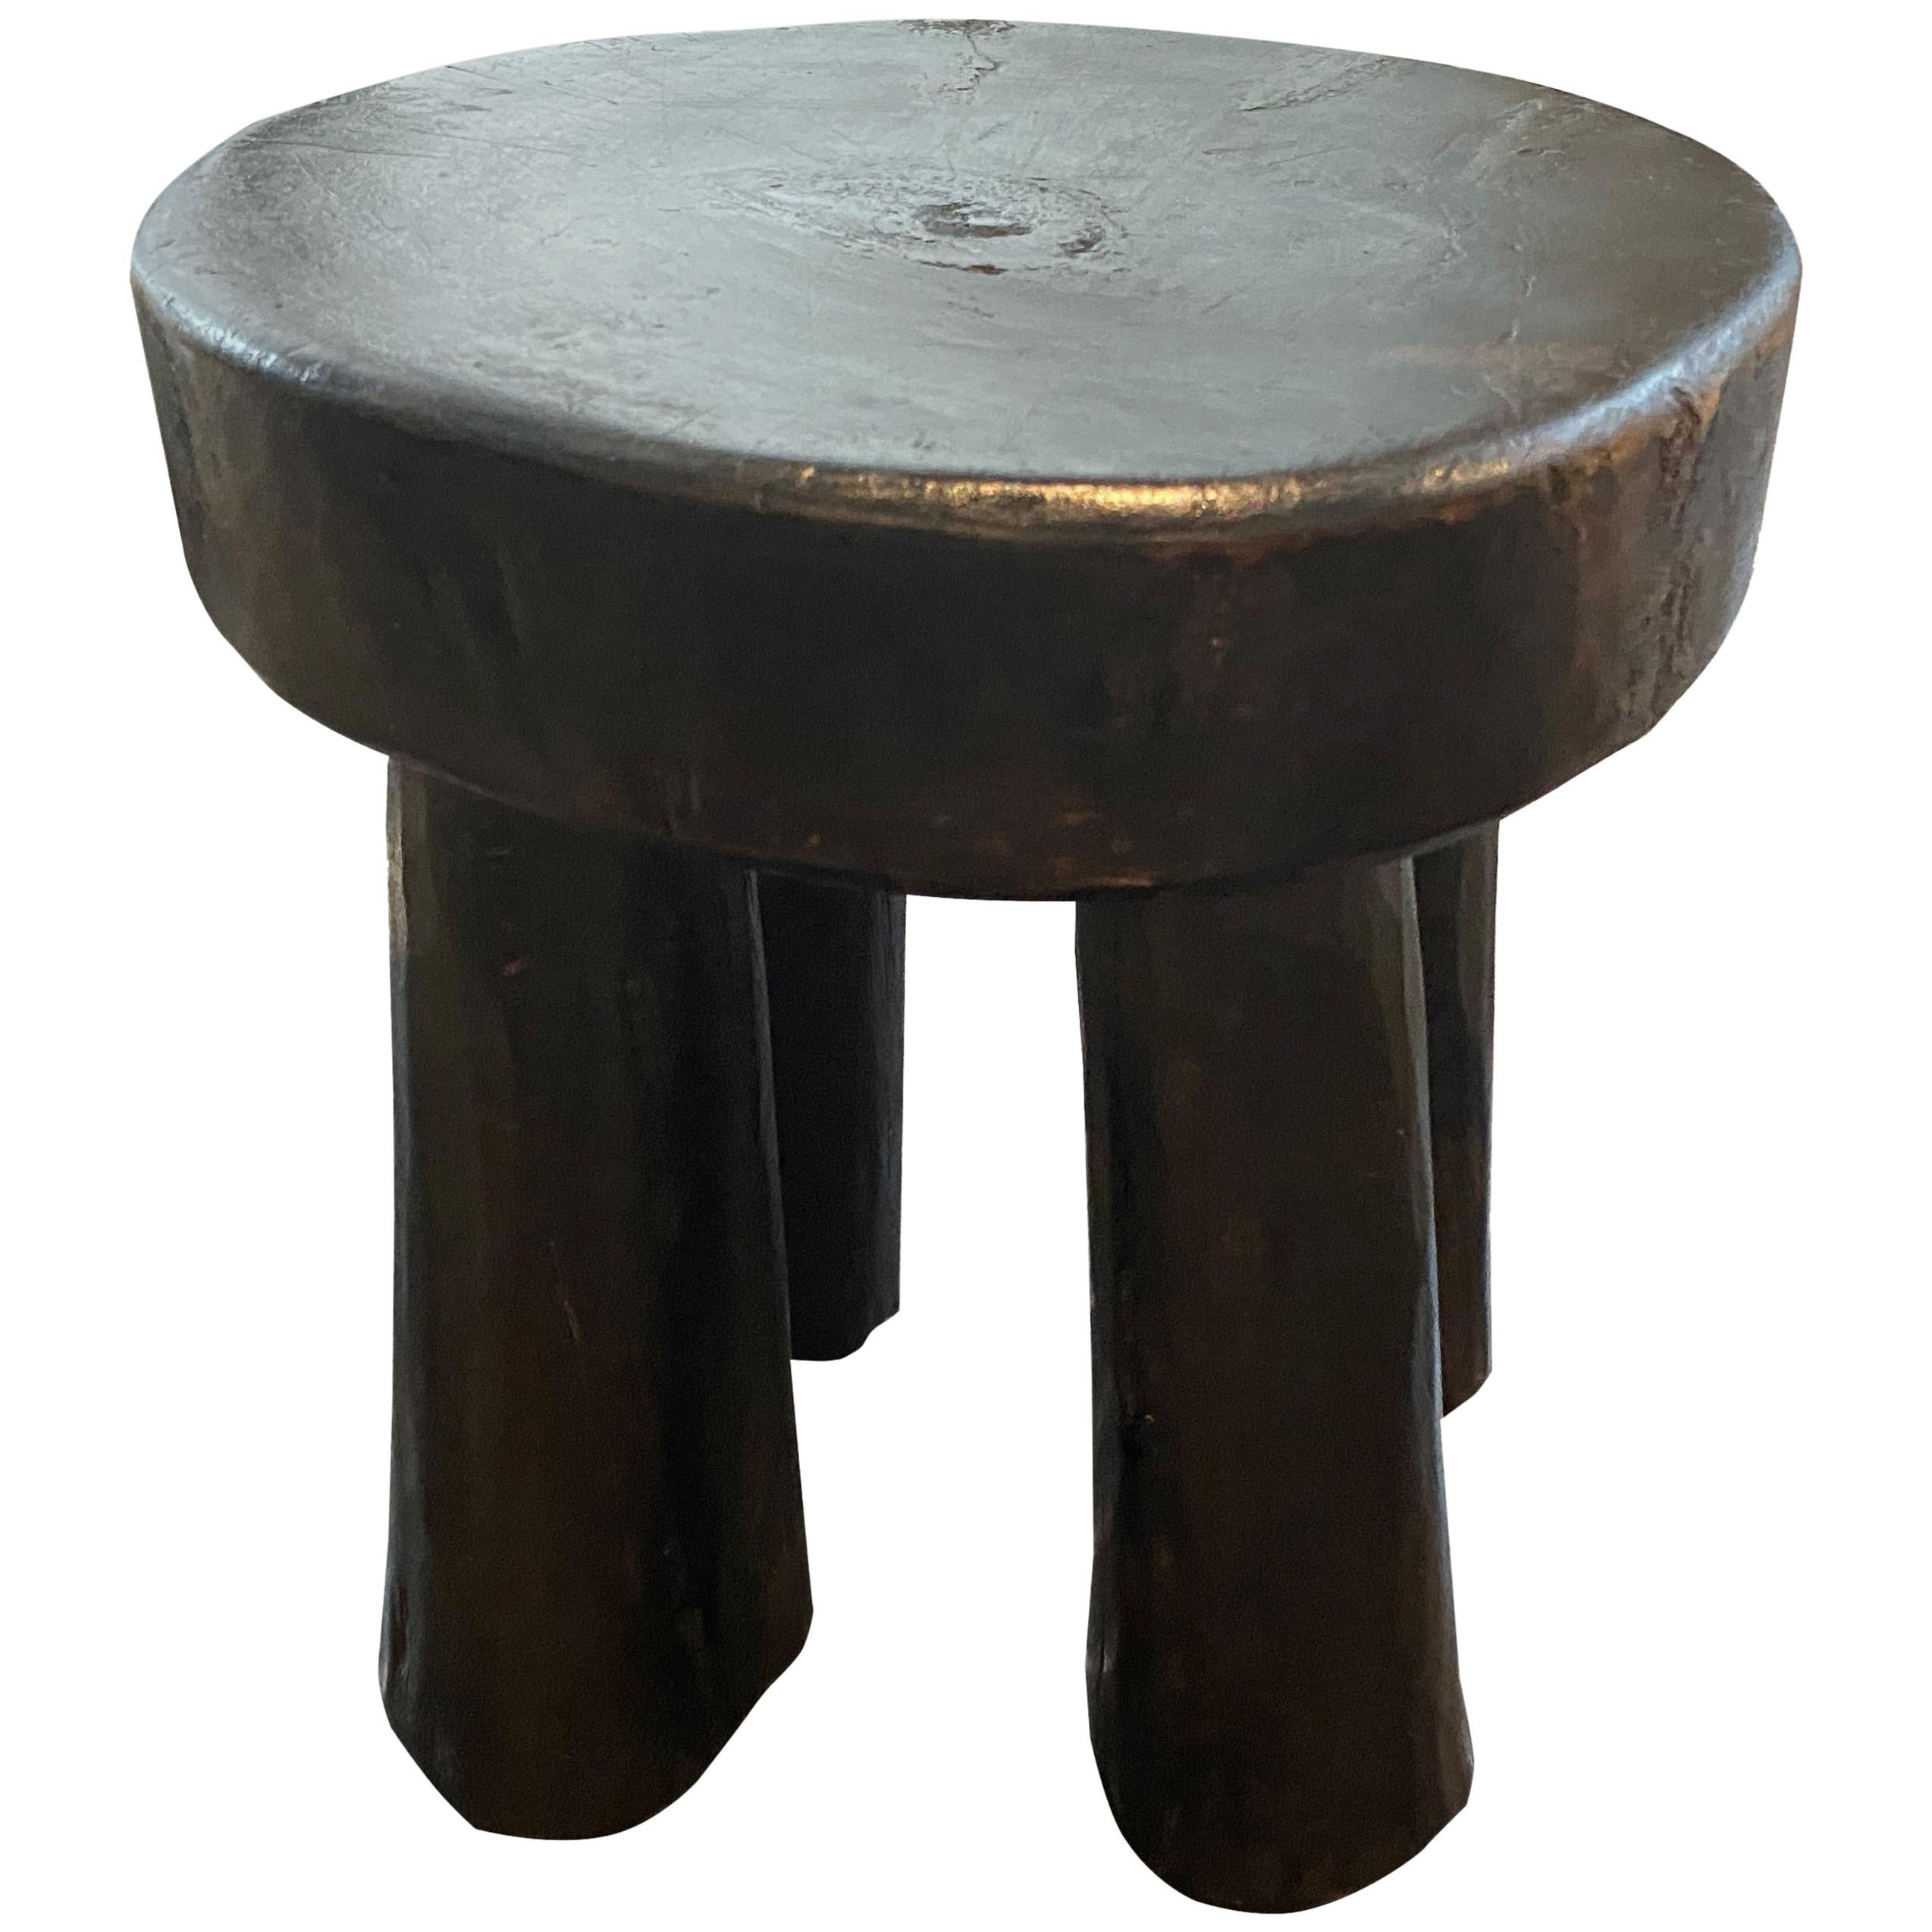 Andrianna Shamaris African Wood Side Table or Stool